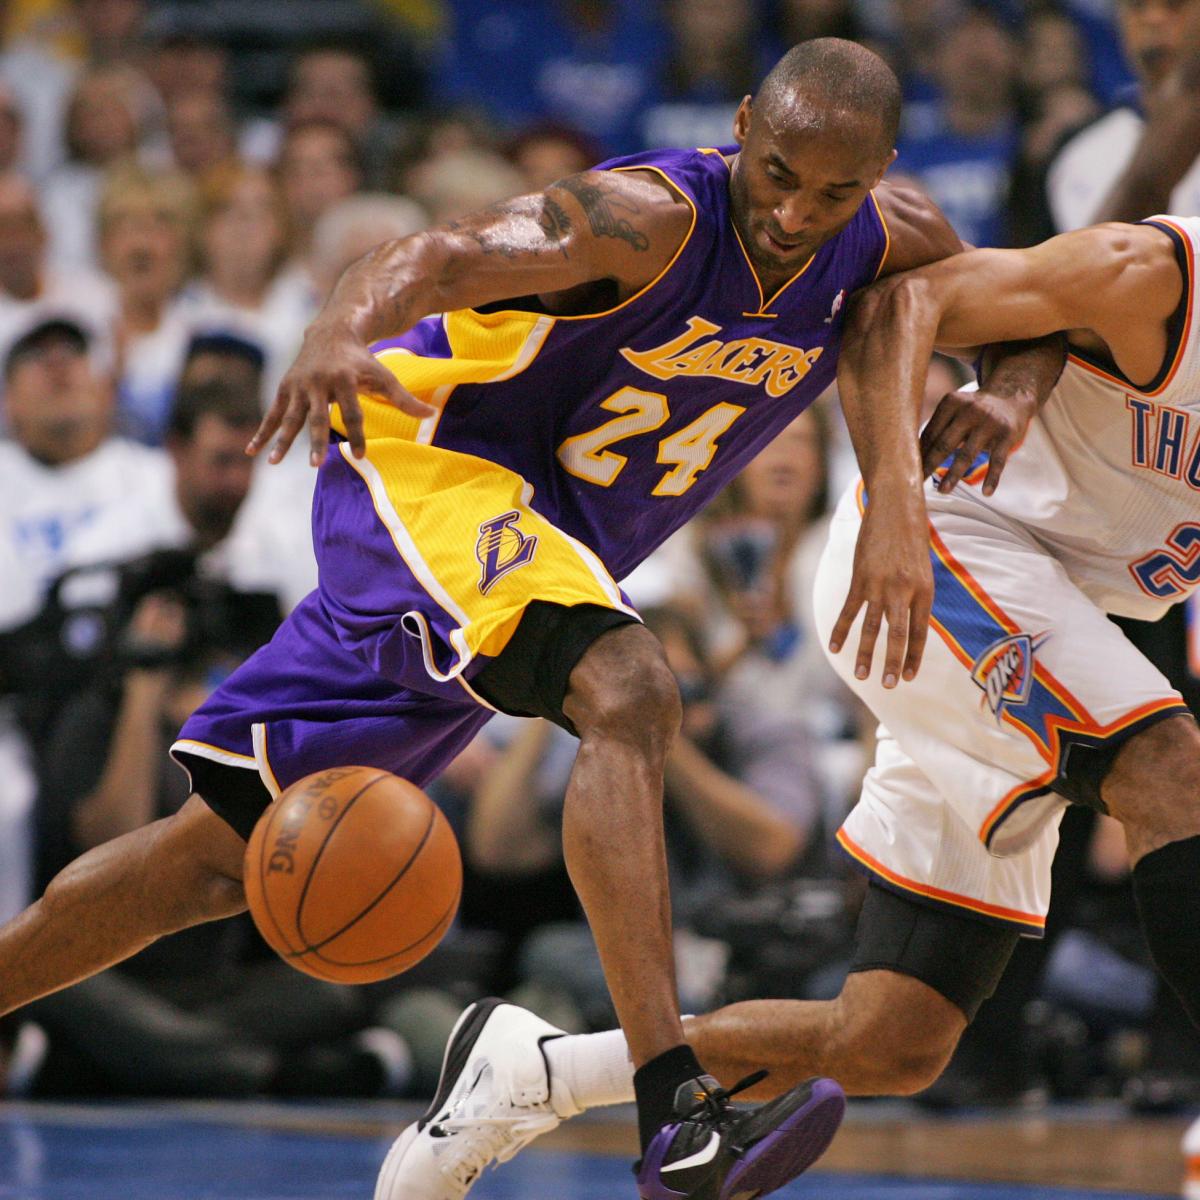 Oklahoma City Thunder vs. L.A. Lakers Game 4: Live Score, Analysis and